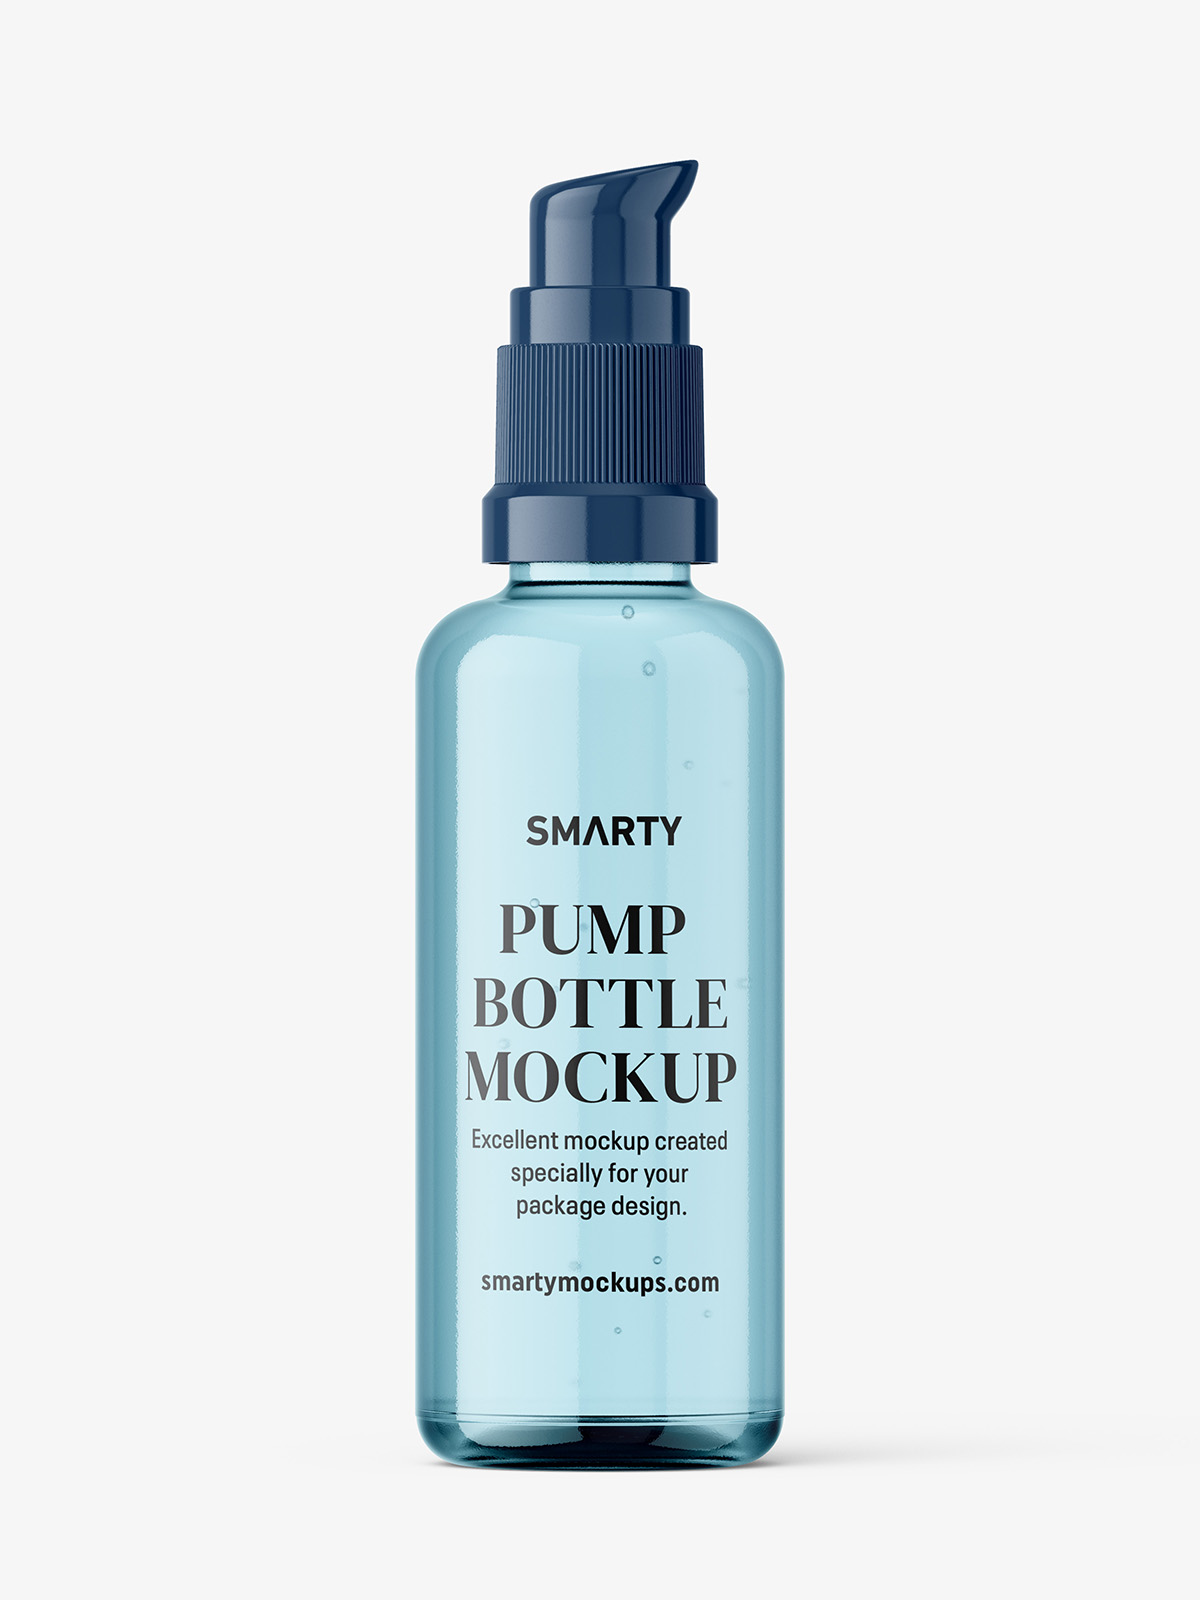 Airless pump bottle mockup / clear - Smarty Mockups